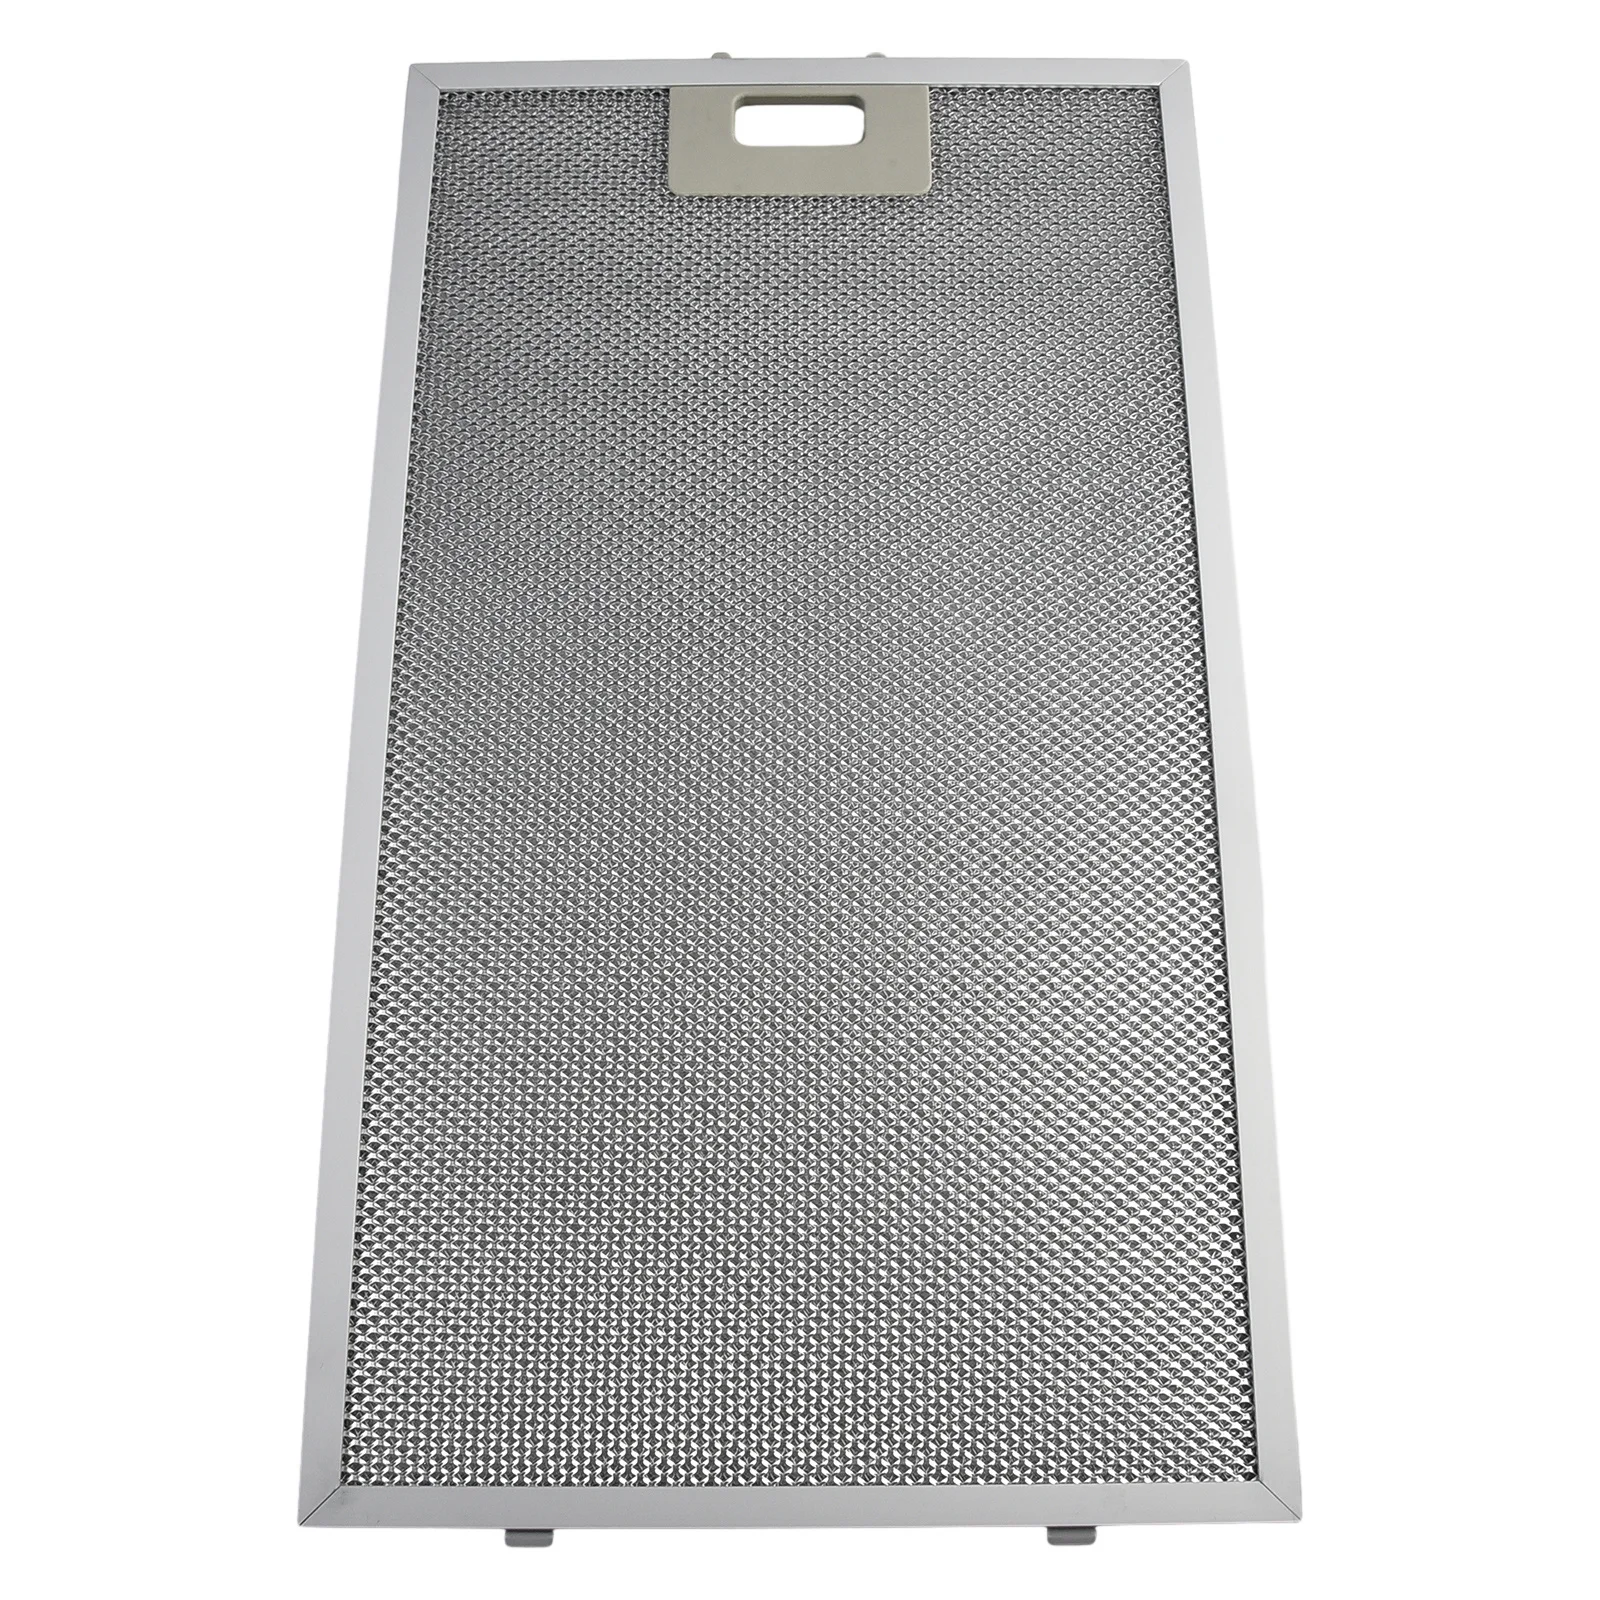 

Stainless Steel Hood Filter Metal Mesh For HOWDENS LAMONA Cooker Hood Extractor Vent 460x260mm Home Improvement